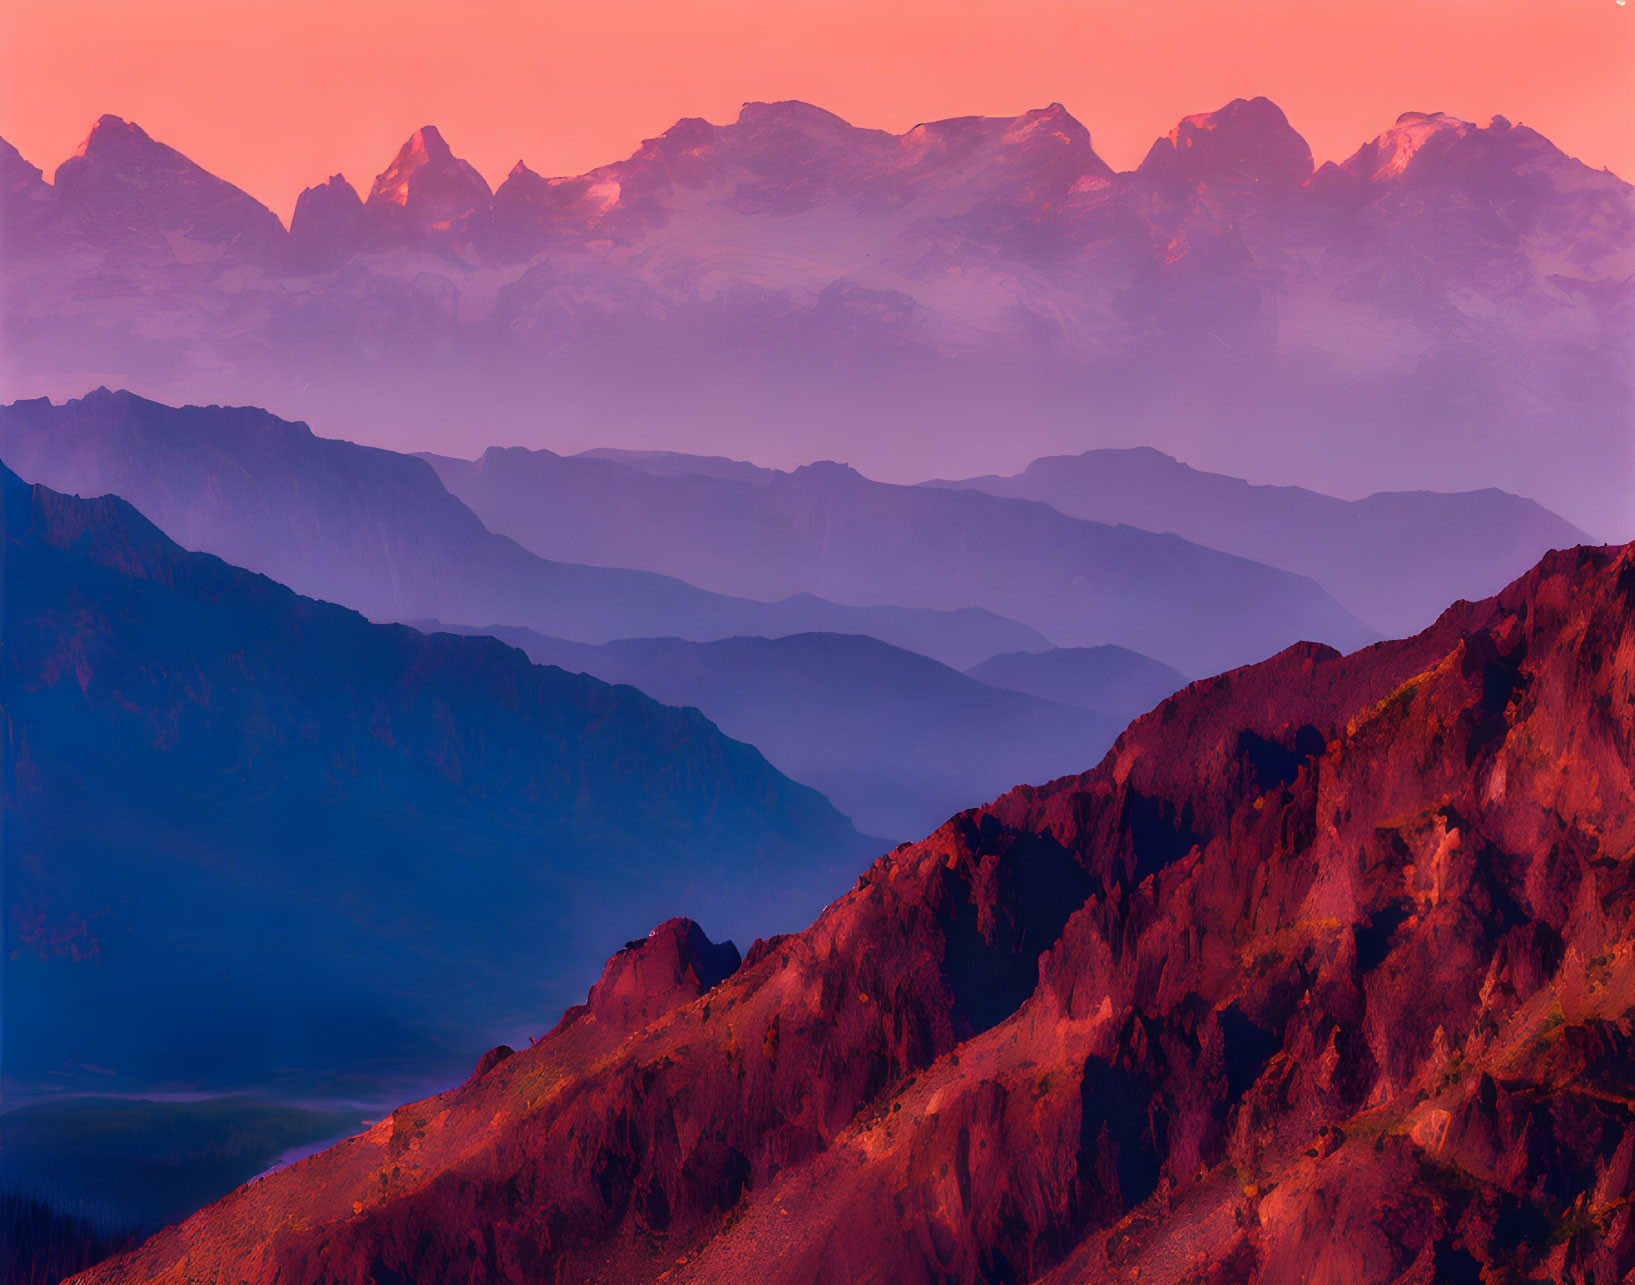 Colorful Sunset Over Layered Mountain Ranges